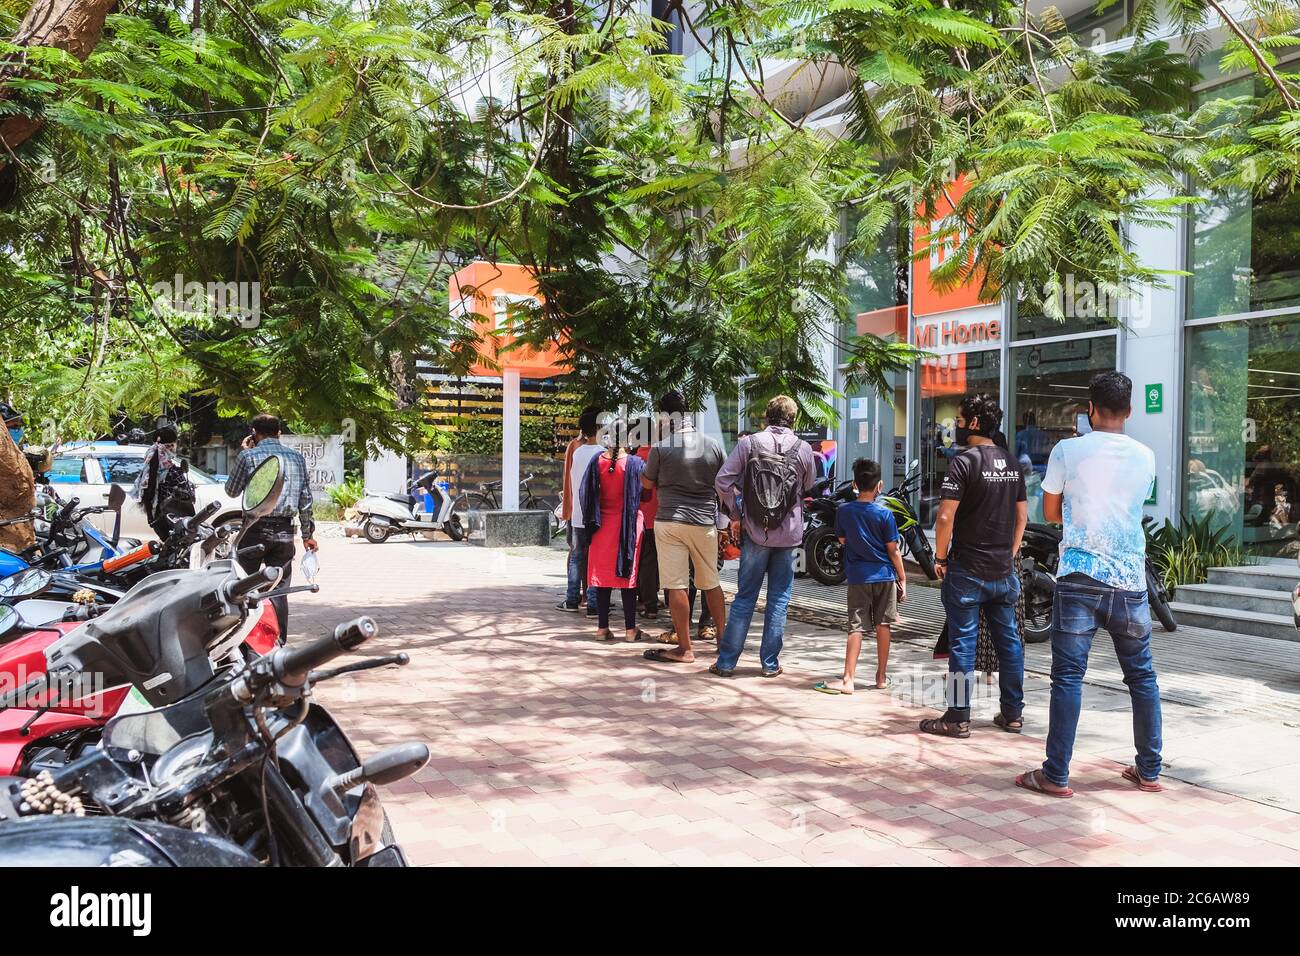 Bangalore, India - May 31, 2020. Citizens stand in line to shop during a pandemic. Bangalore India Stock Photo